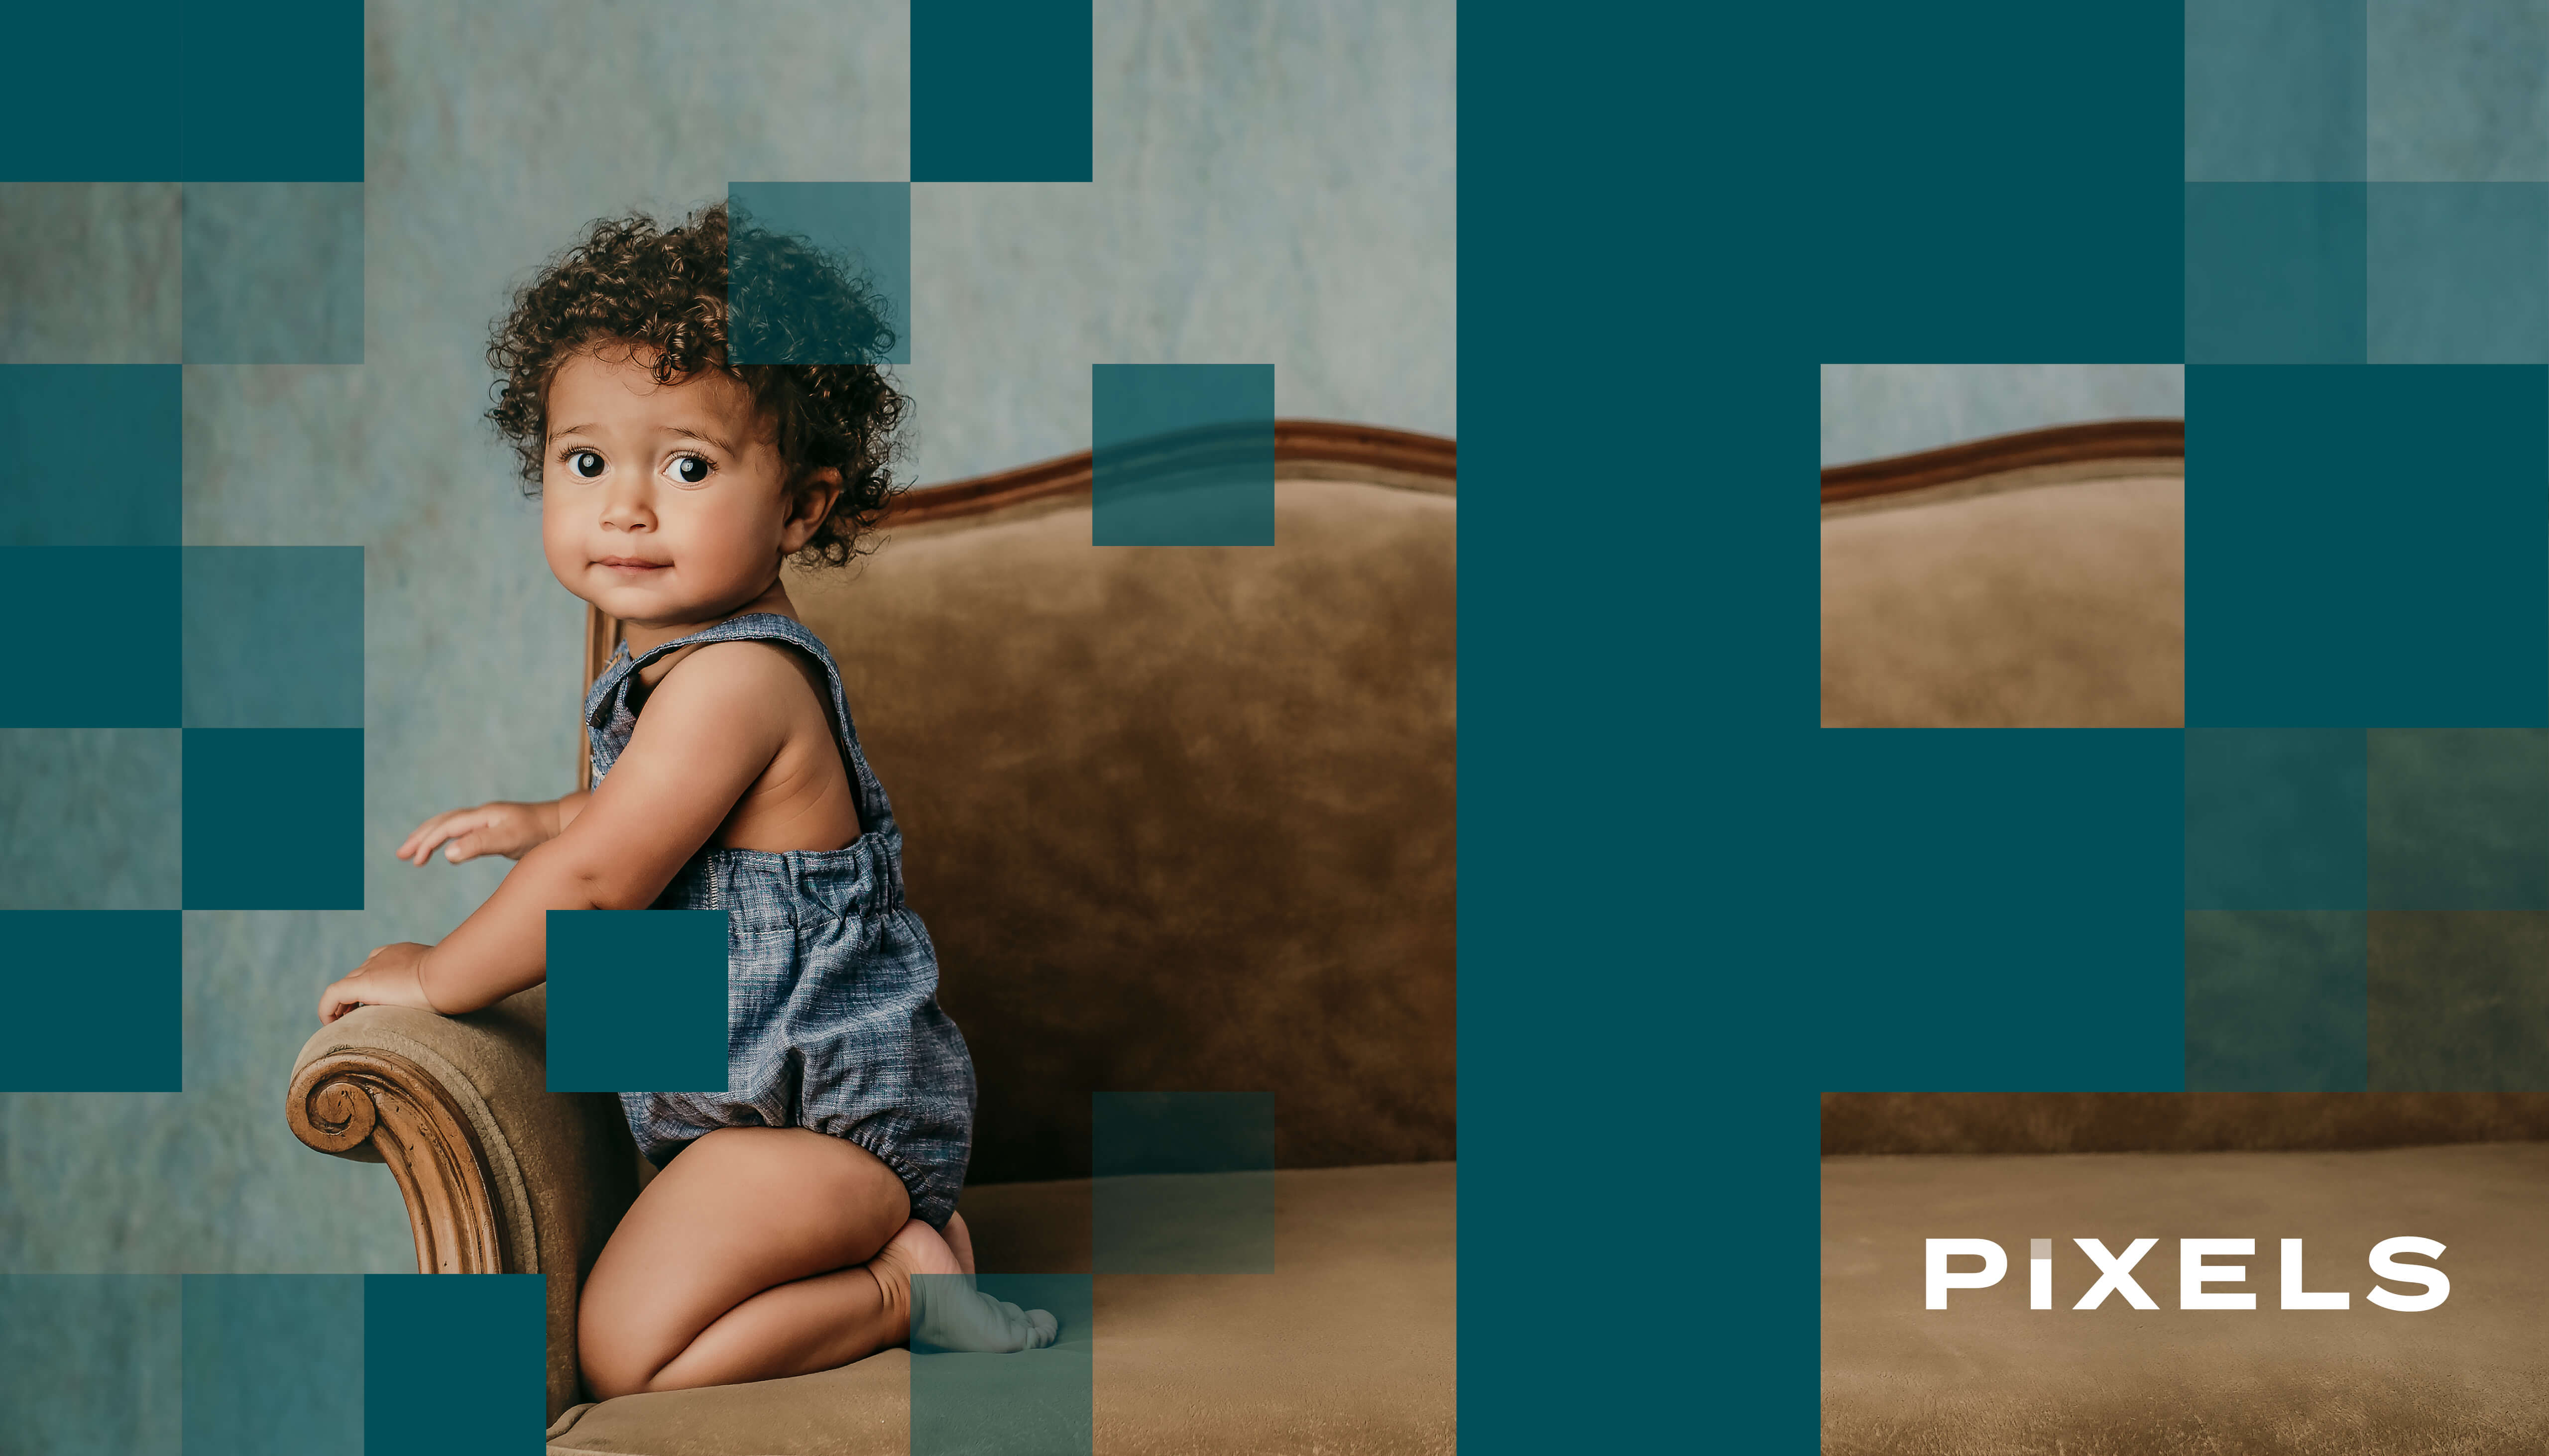 Pixels by Emily - Newborn, Maternity, and Family Portraits - Branding